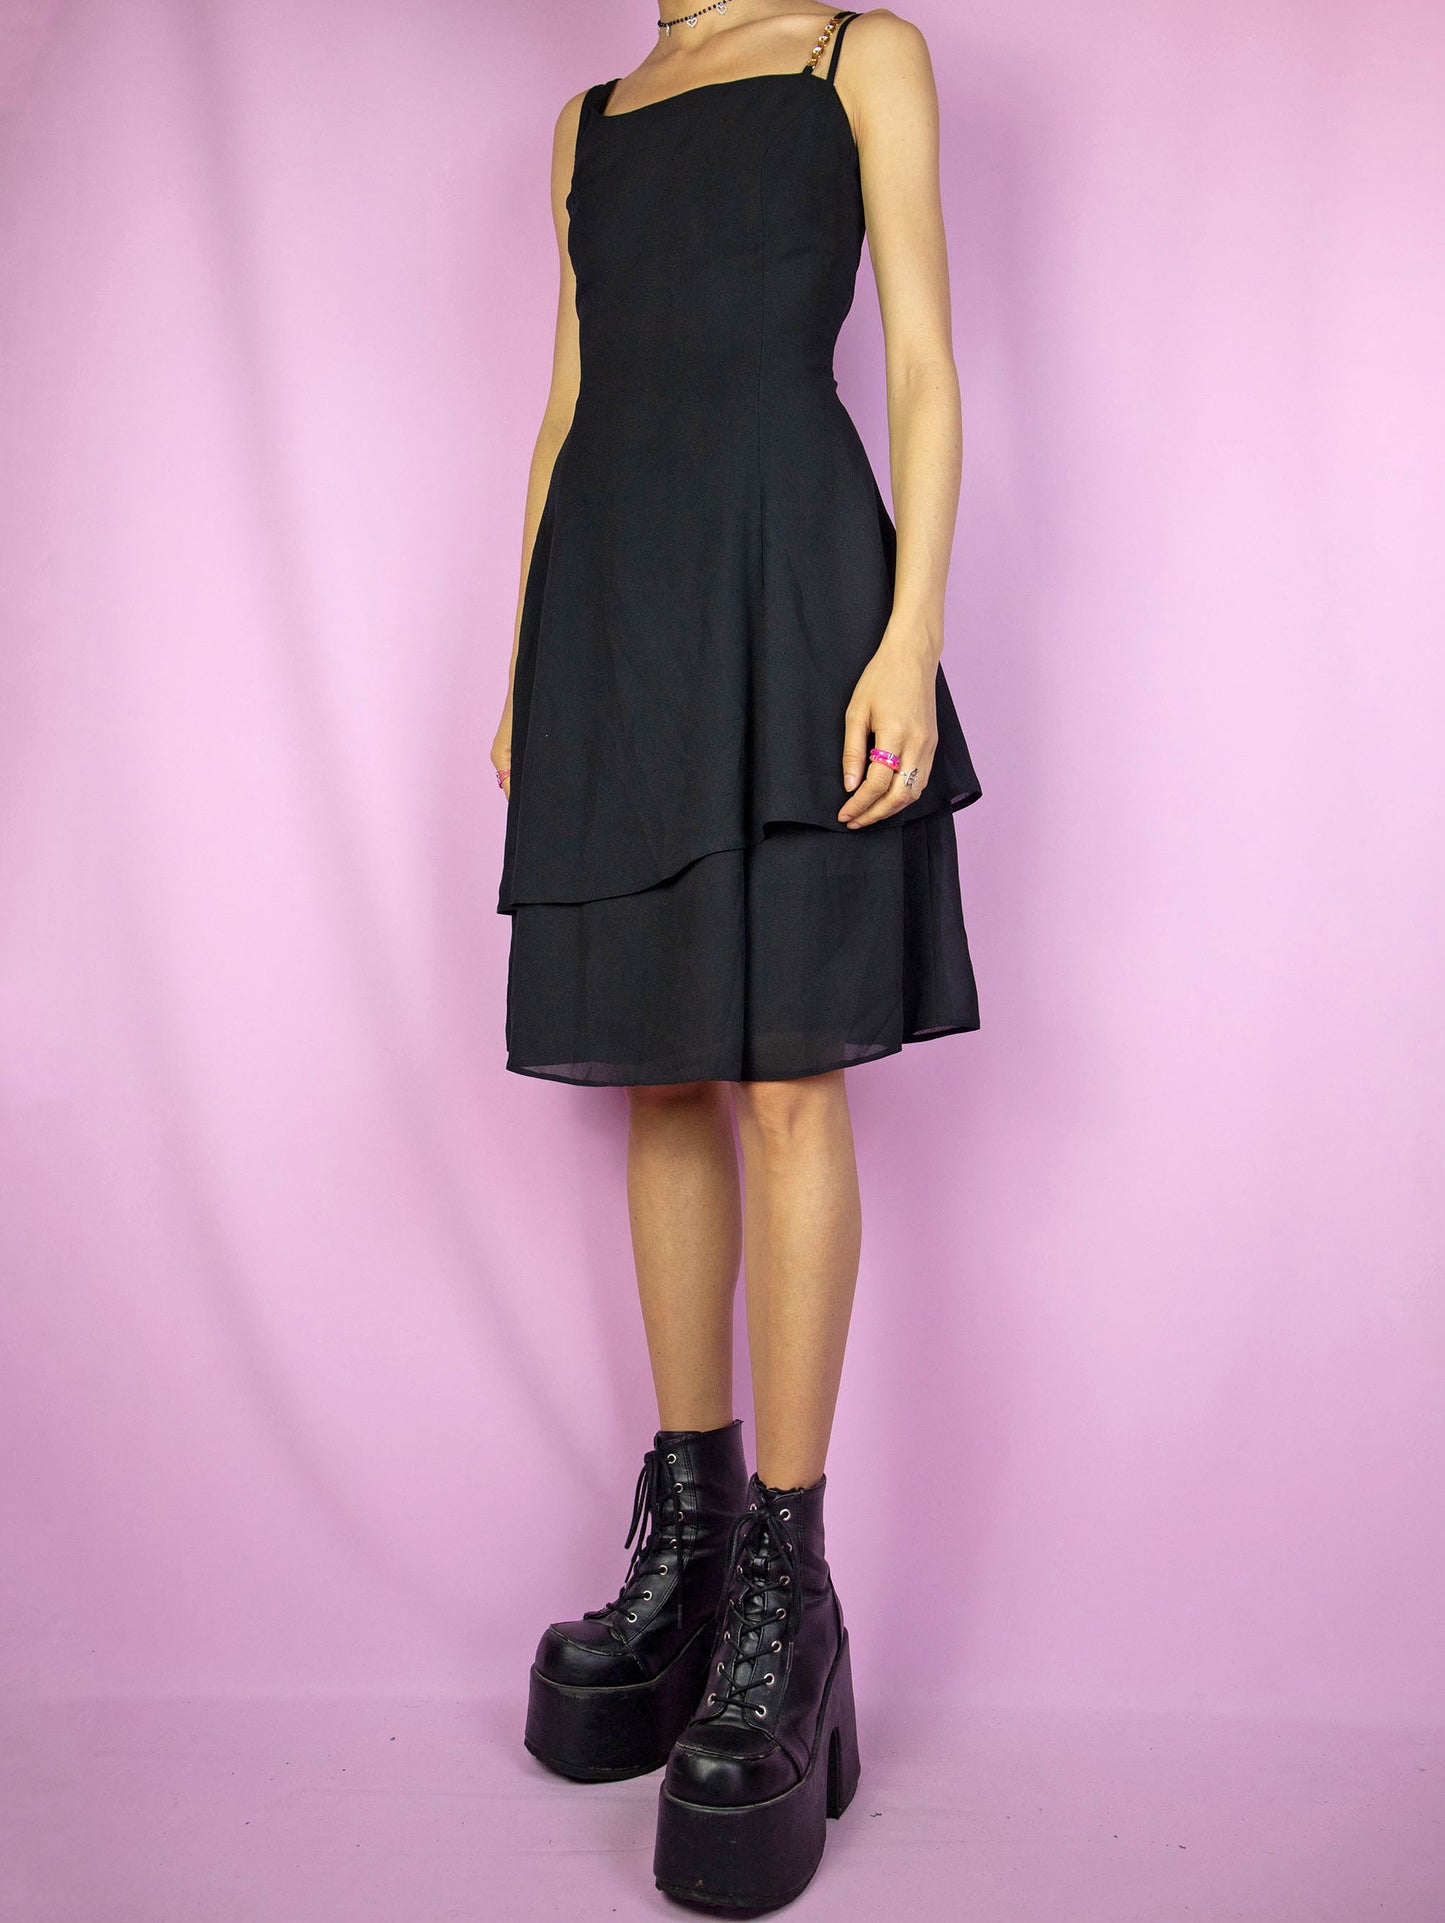 The Vintage 90s Black Asymmetric Layered Dress is an elegant cocktail party mini dress with double straps, rhinestone detailing and back zip closure.